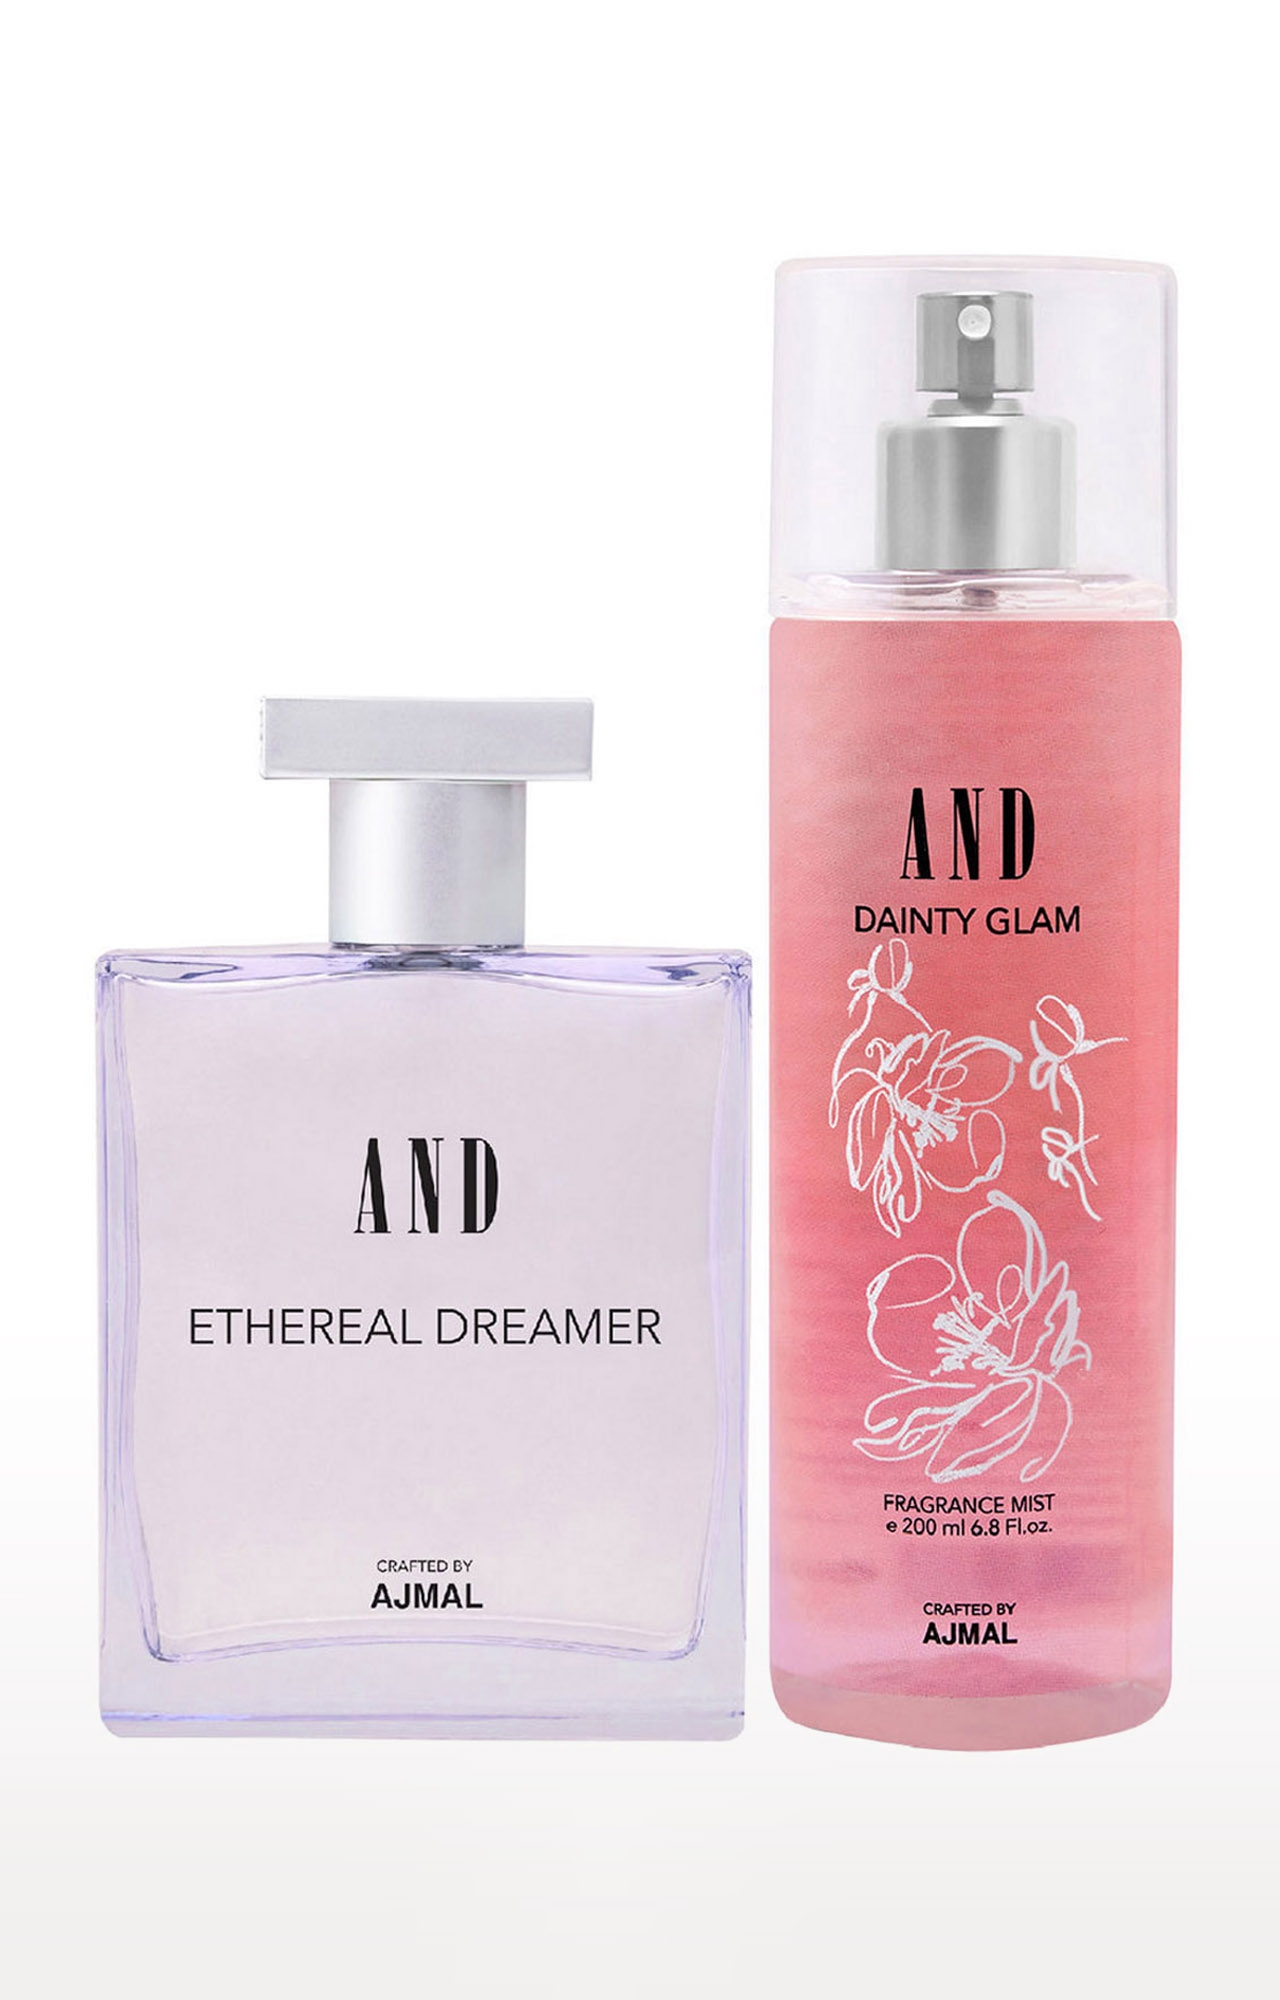 AND Crafted By Ajmal | And Ethereal Dreamer Edp 100Ml & Dainty Glam Body Mist 200Ml Pack Of 2 For Women Crafted By Ajmal 